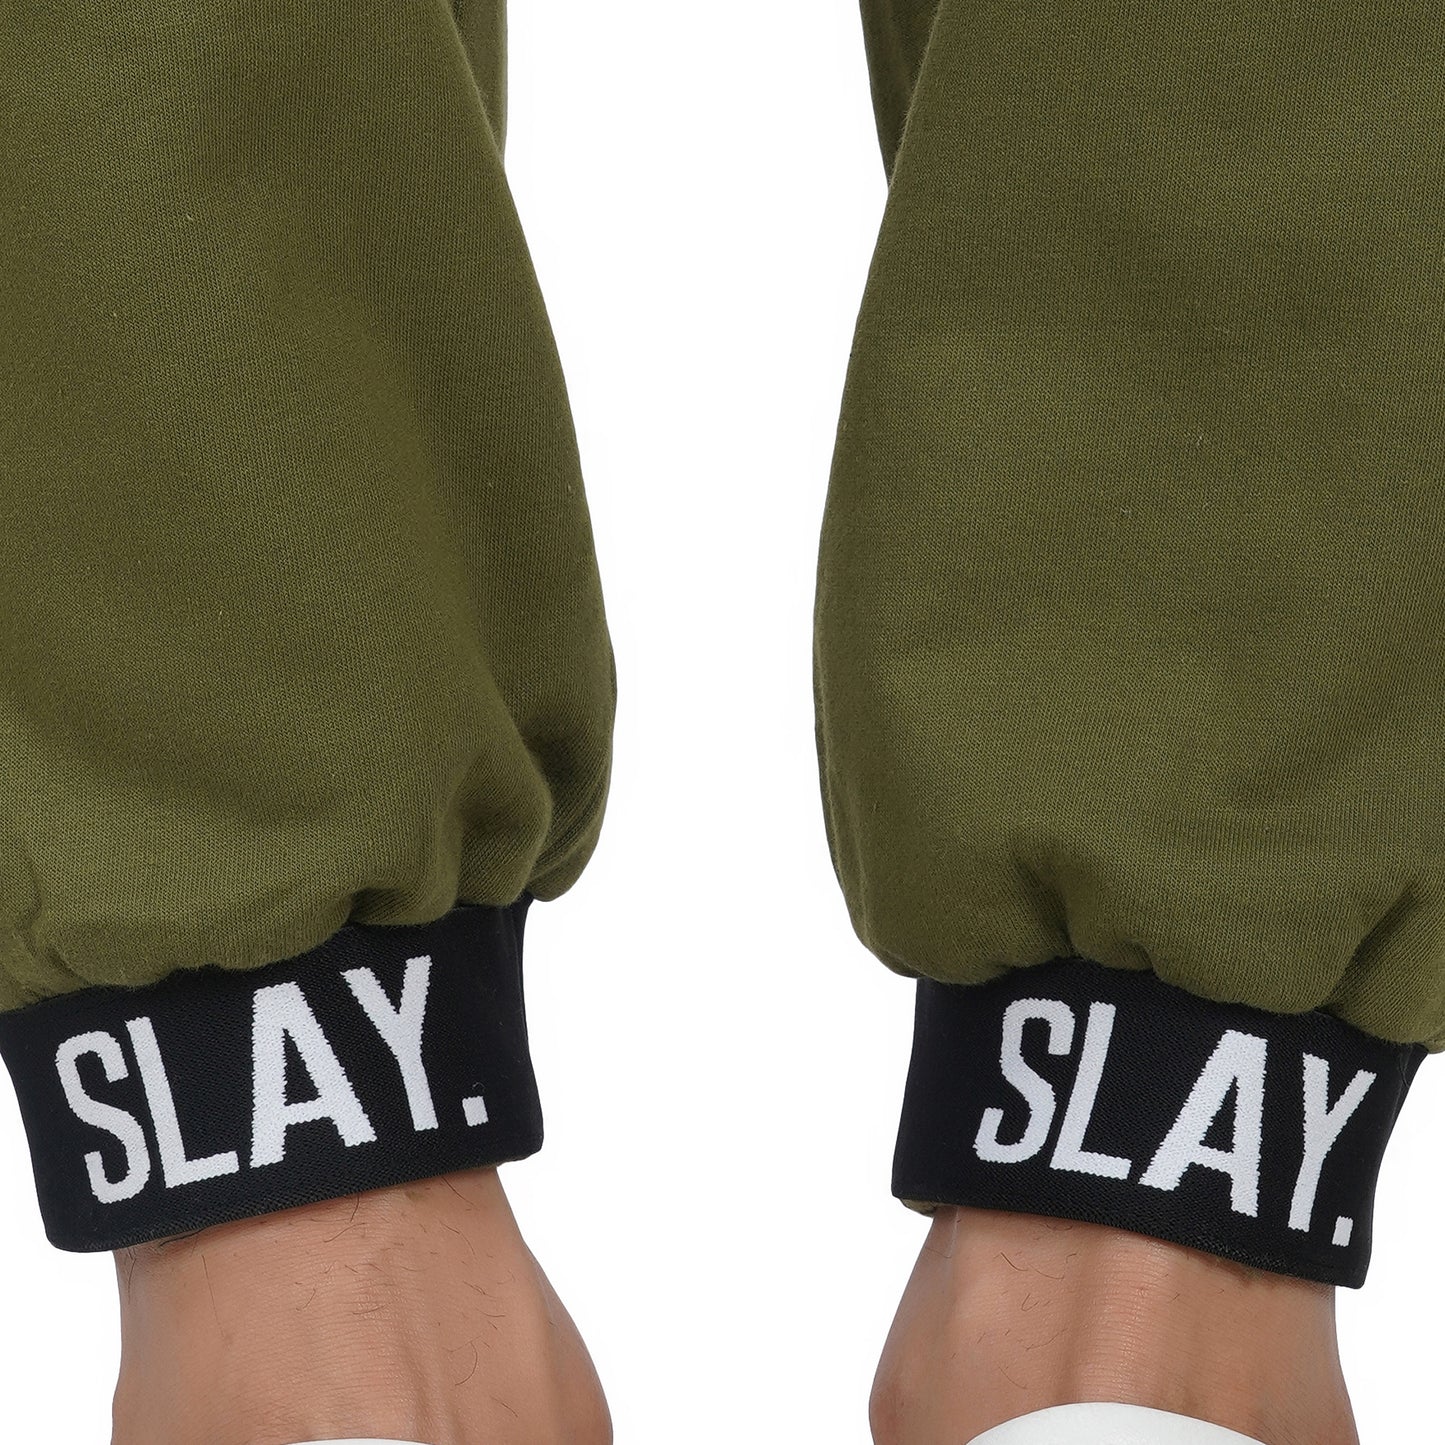 SLAY. Classic Men's Limited Edition Olive Green Tracksuit